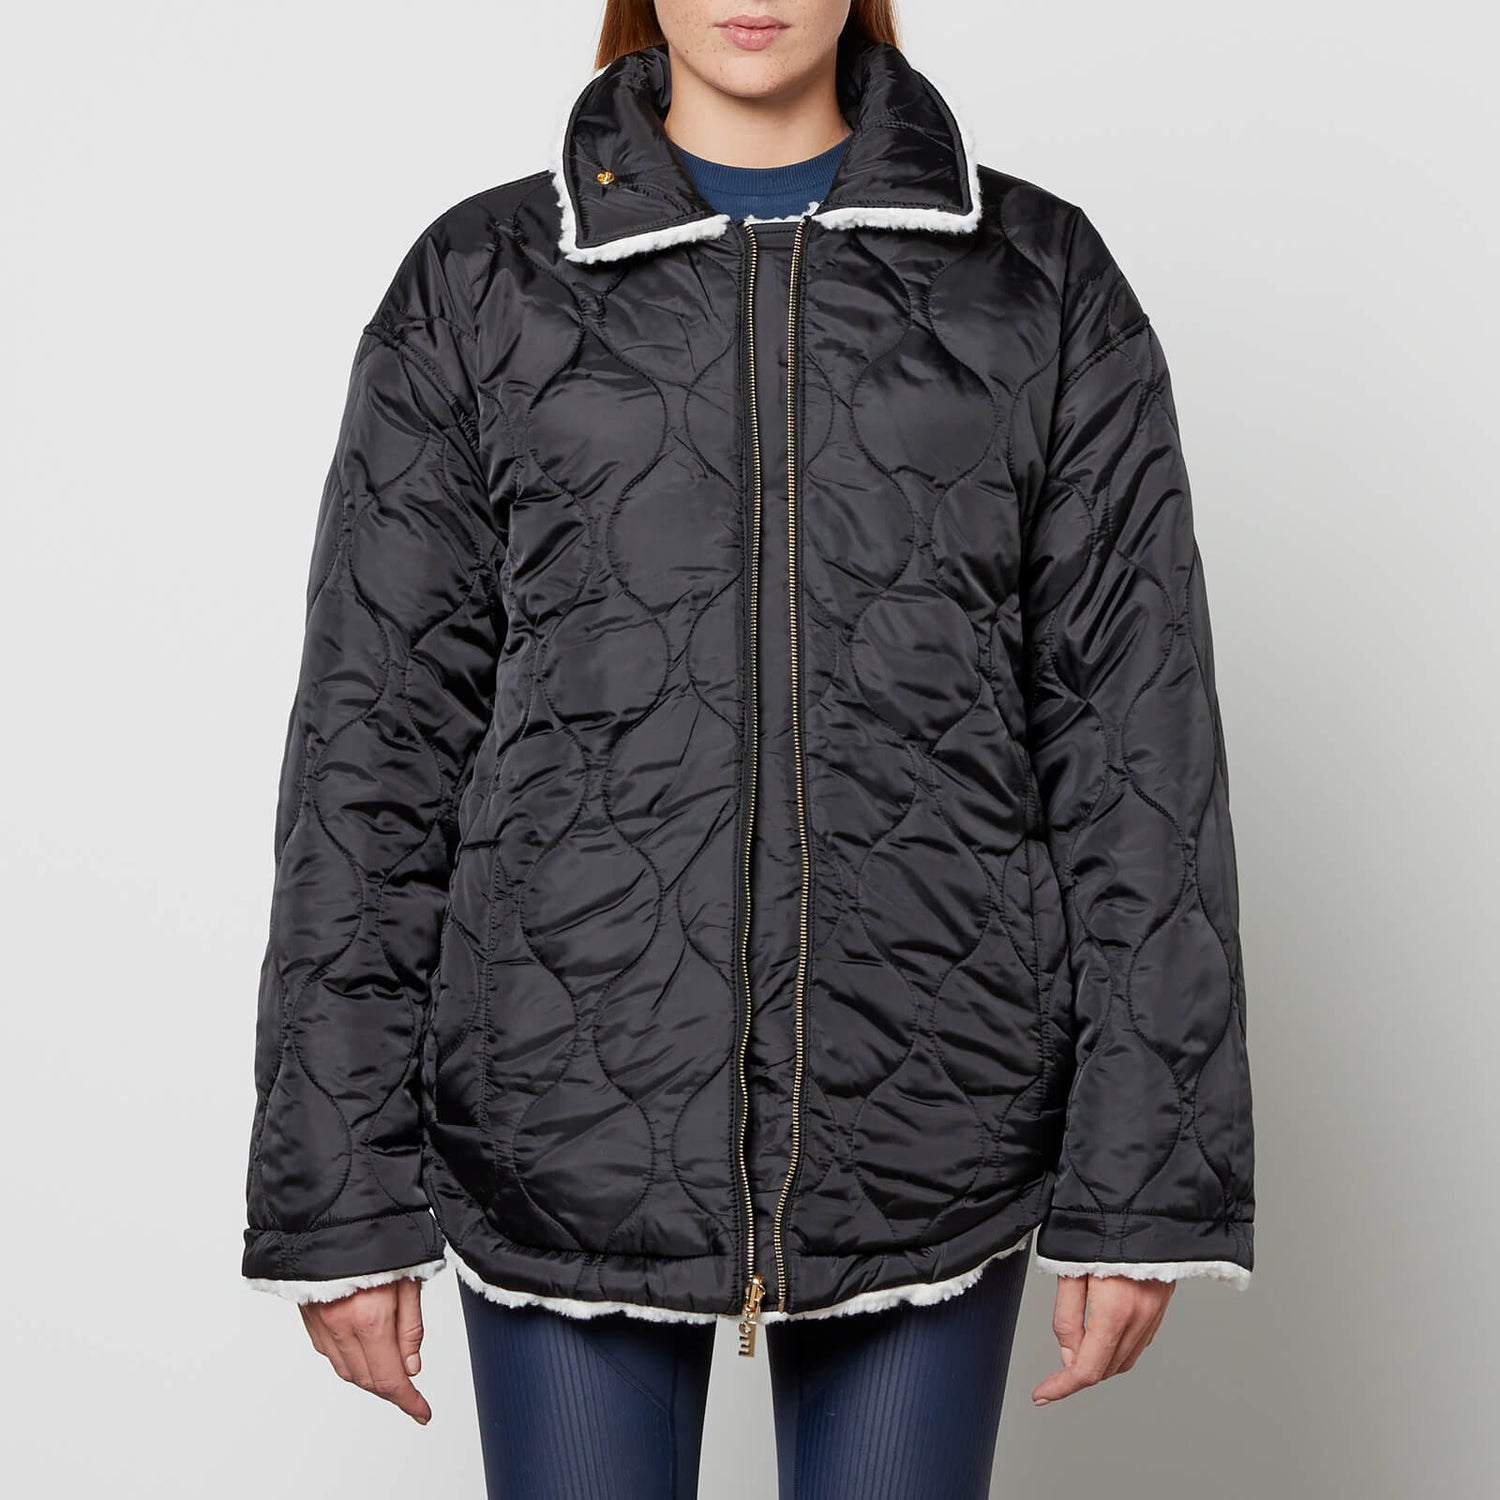 P.E Nation Outline Reversible Fleece and Quilted Shell Jacket - M